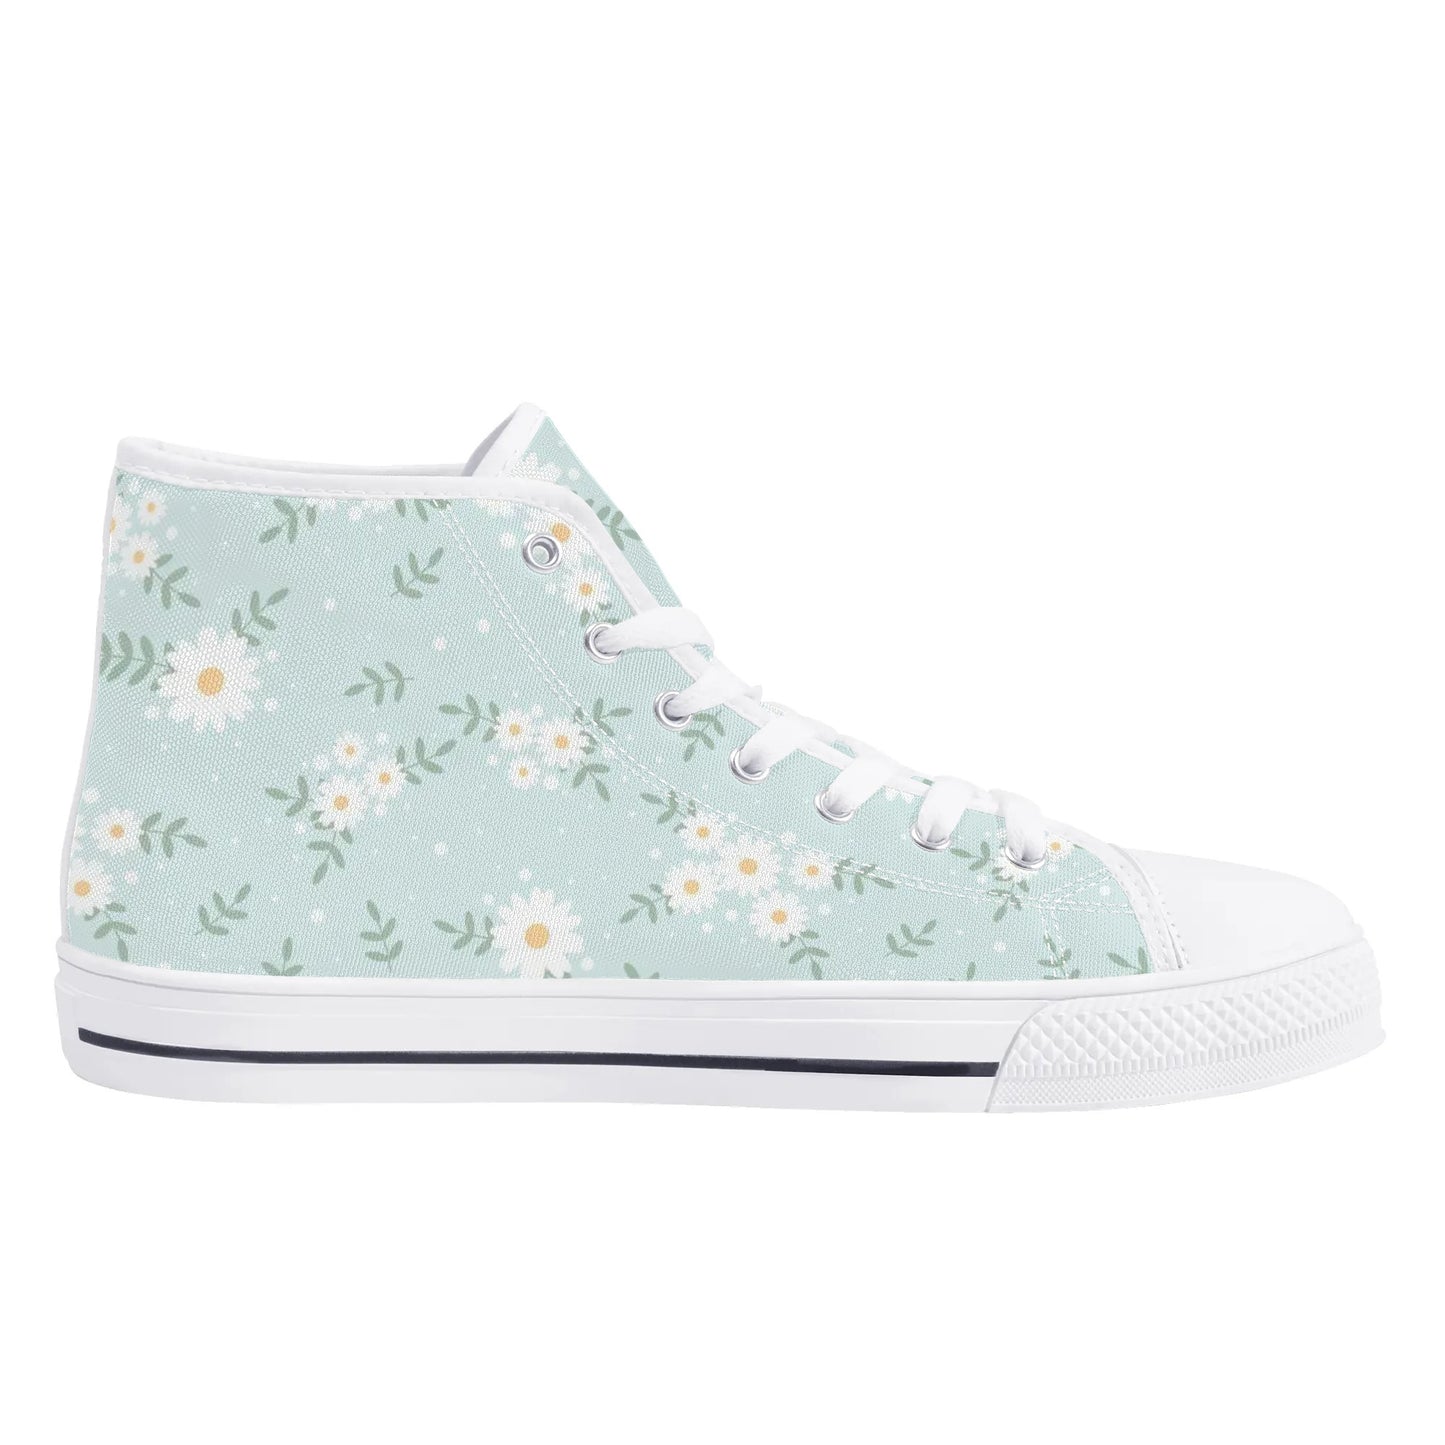 Daisy Women High Top Shoes, Blue Floral Lace Up Sneakers Footwear Canvas Streetwear Ladies Girls White Trainers Designer Gift